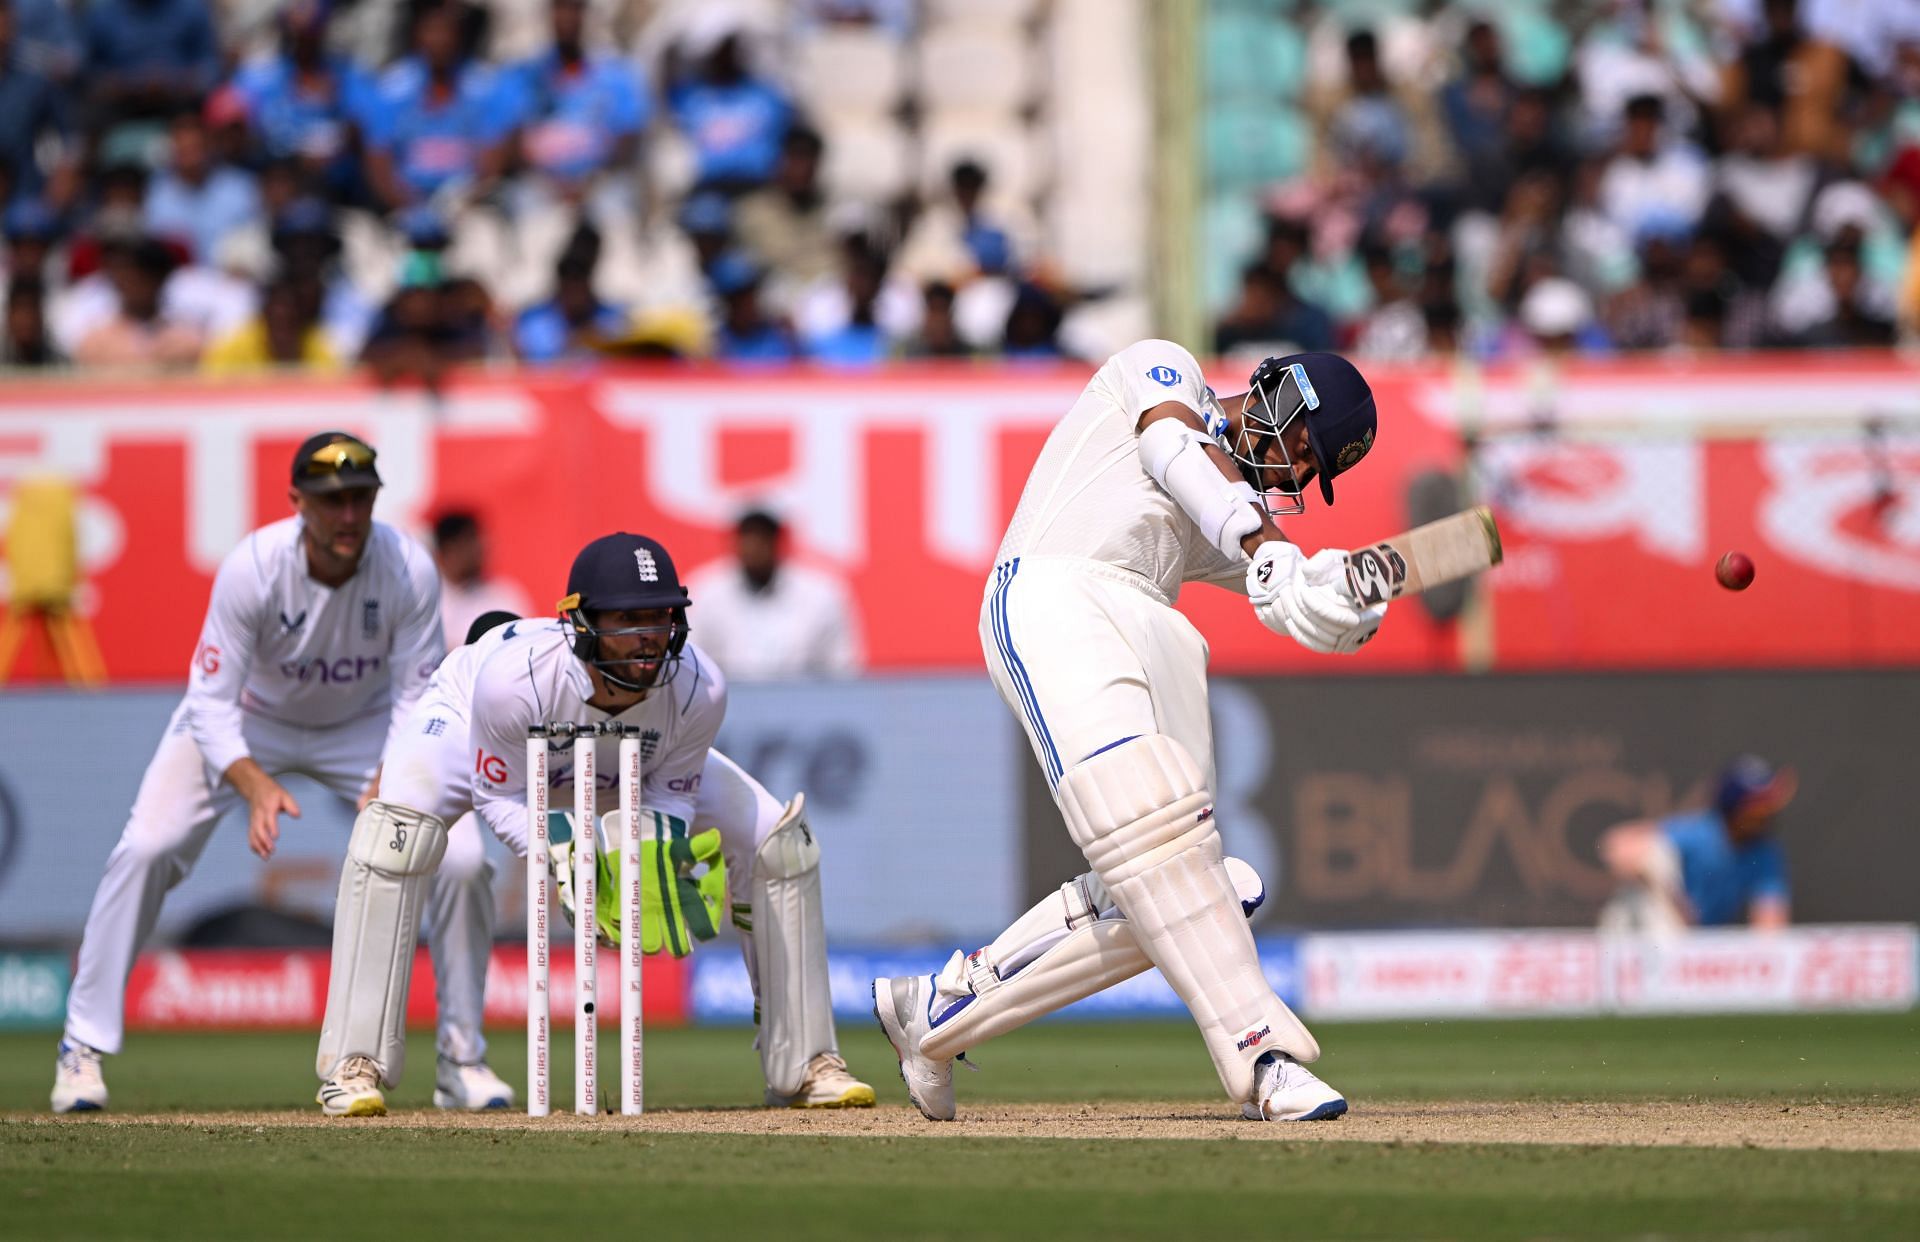 Yashasvi Jaiswal struck 19 fours and seven fours during his innings. [P/C: Getty]